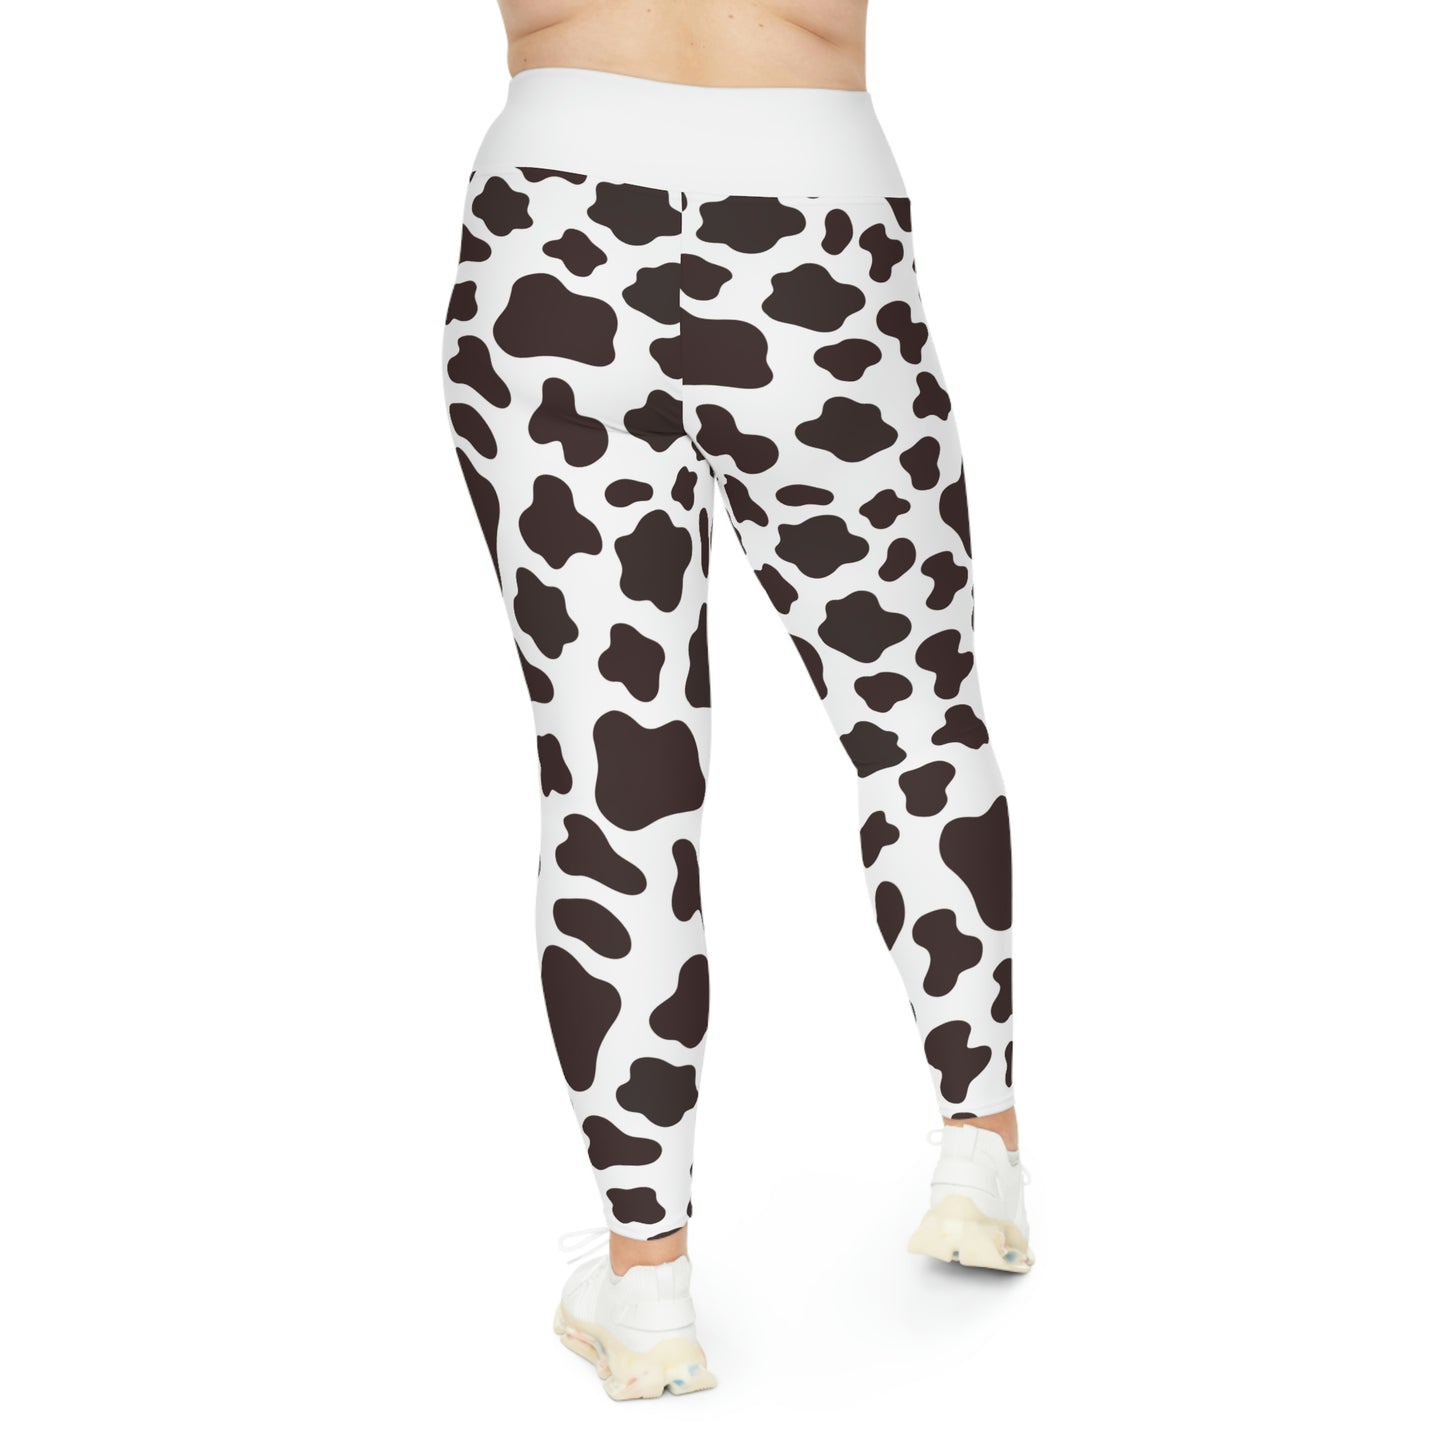 Cow Print Plus Size Leggings One of a Kind Gift - Unique Workout Activewear tights for Mom fitness, Mothers Day, Girlfriend Christmas Gift